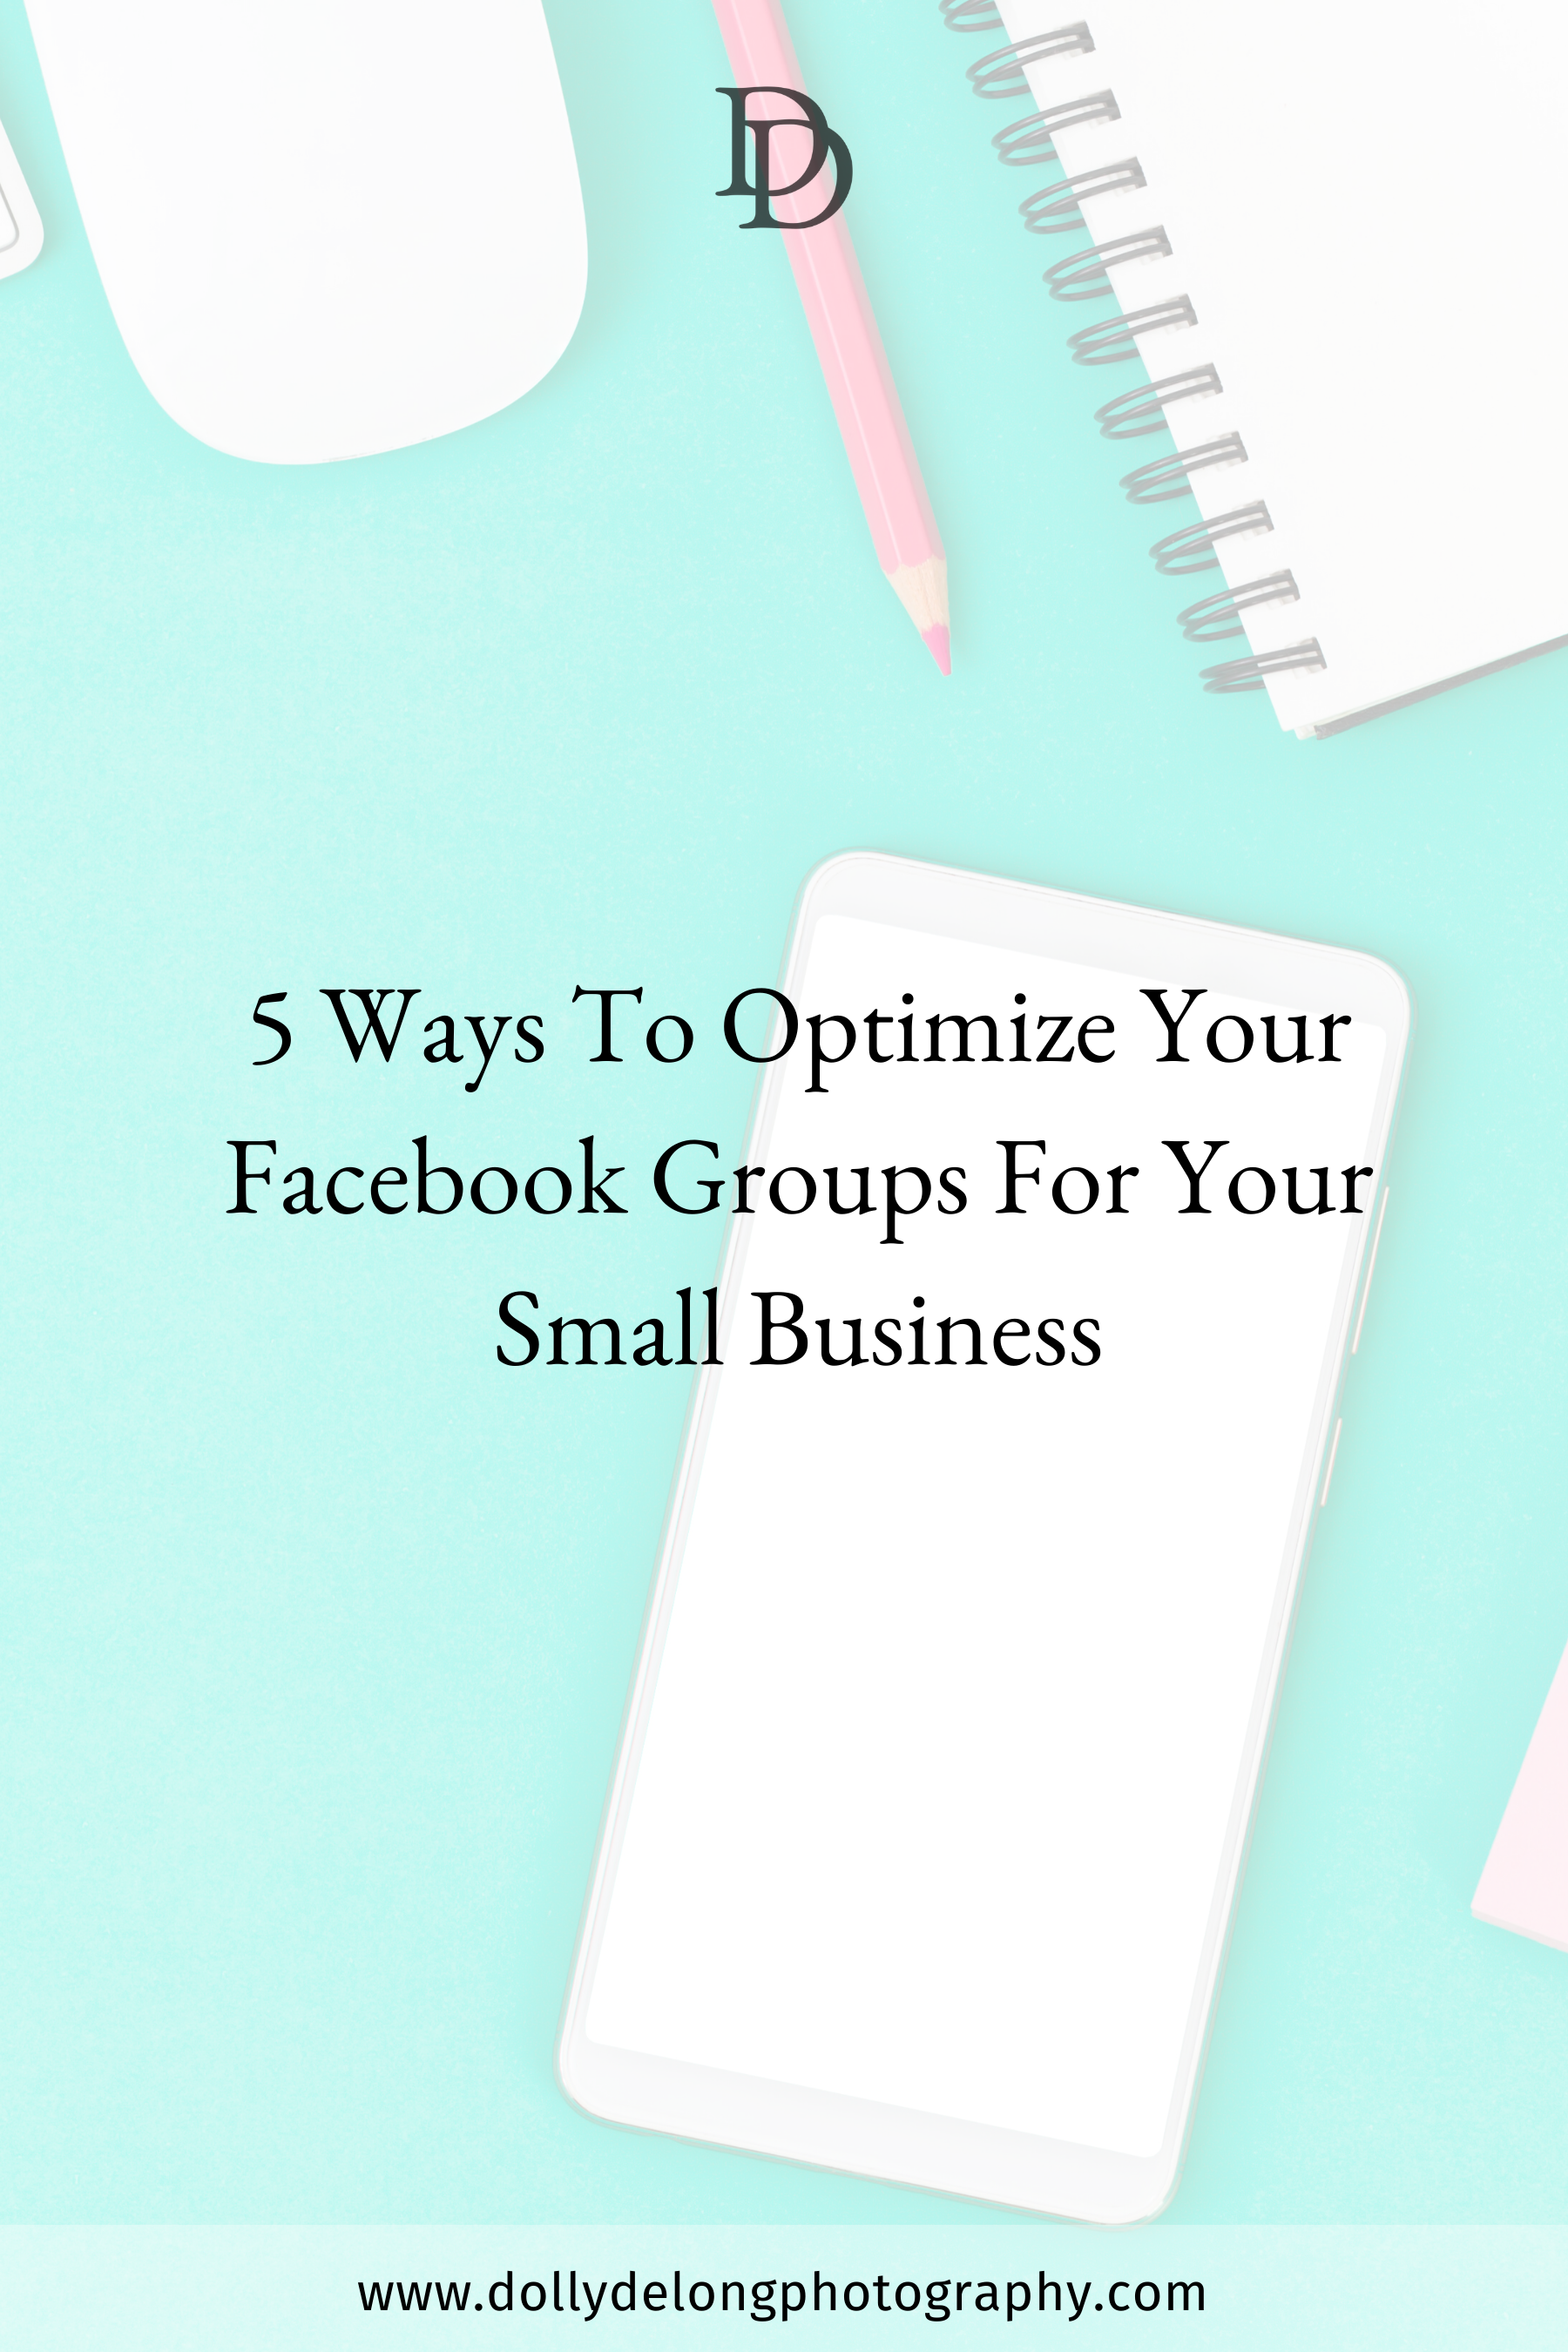 5 Ways To Optimize Your Facebook Groups For Your Small Business by Dolly DeLong Photography